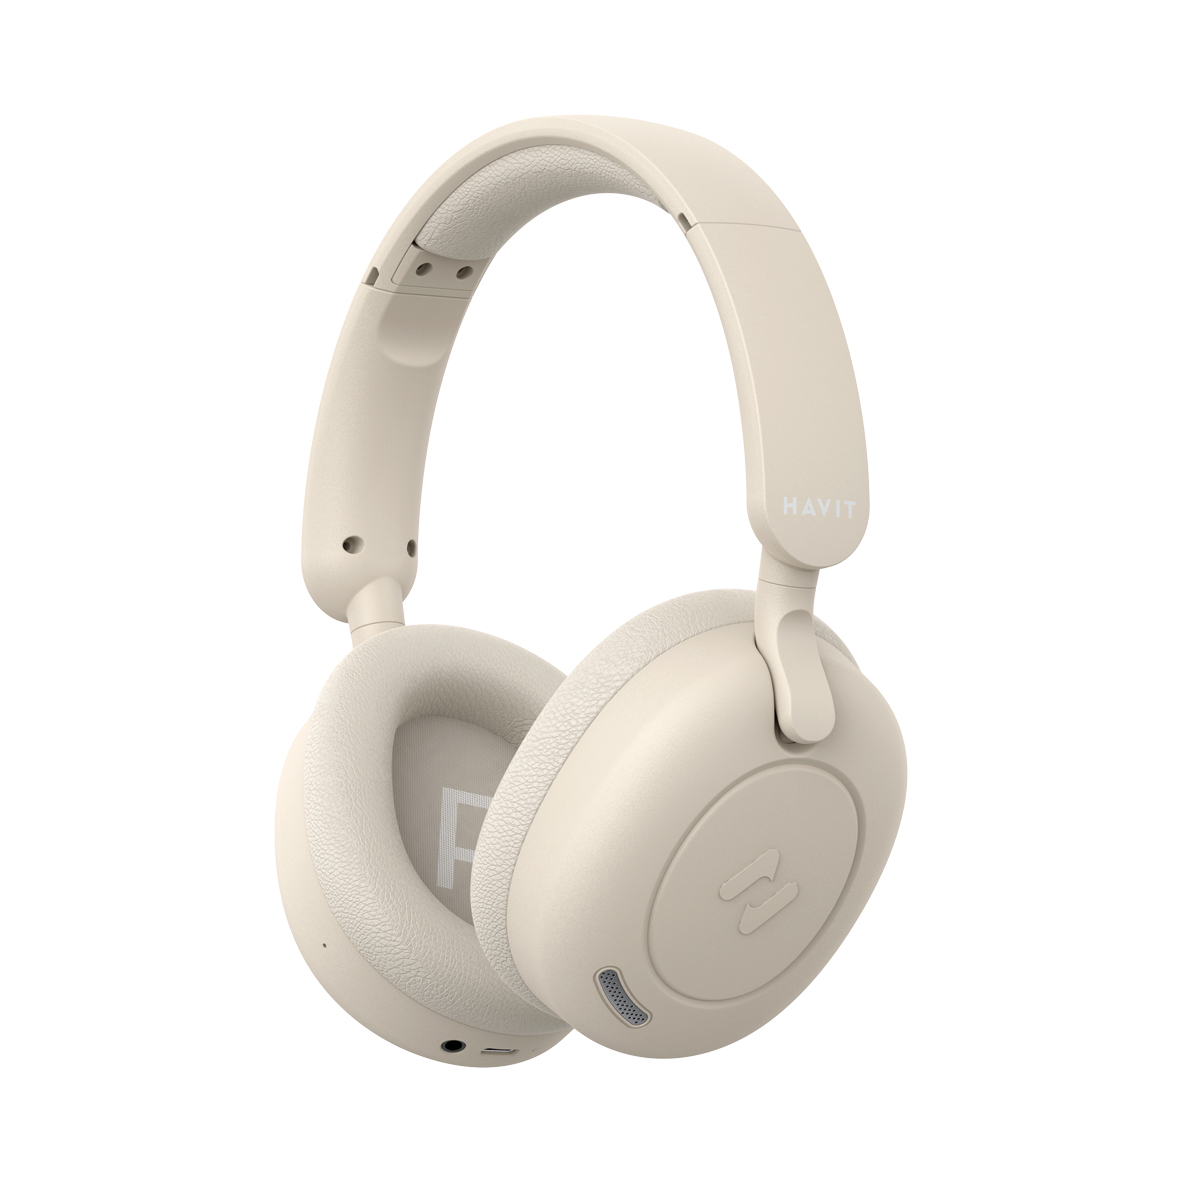 Hybrid Active Noise Cancelling Wireless Headphone